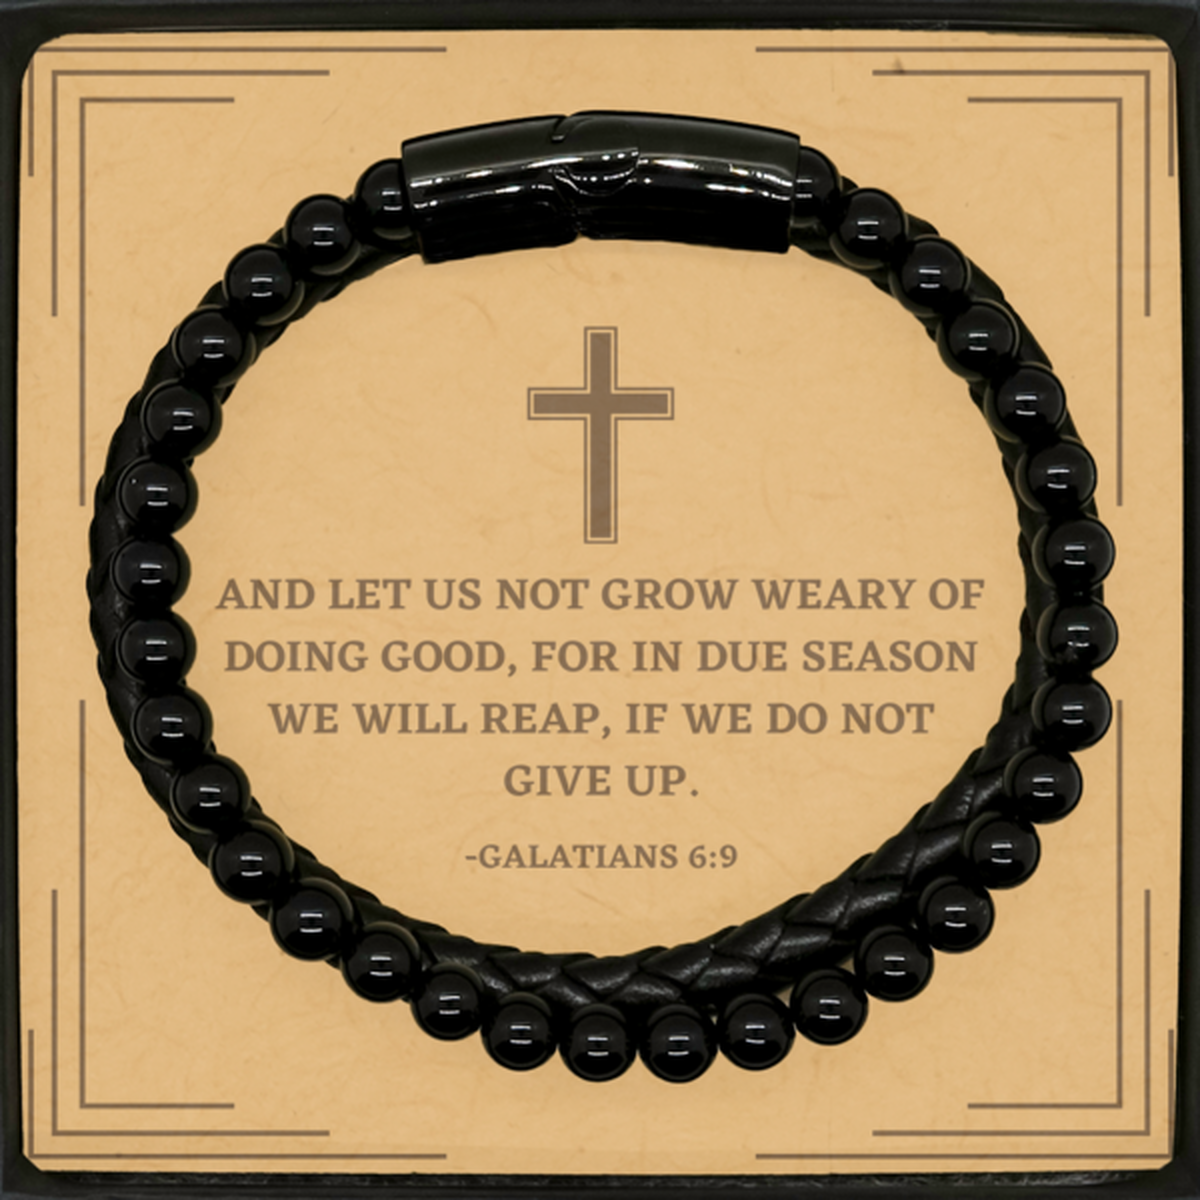 Baptism Gifts For Teenage Boys Girls, Christian Bible Verse Stone Leather Bracelet, And let us not grow weary, Confirmation Gifts, Bible Verse Card for Son, Godson, Grandson